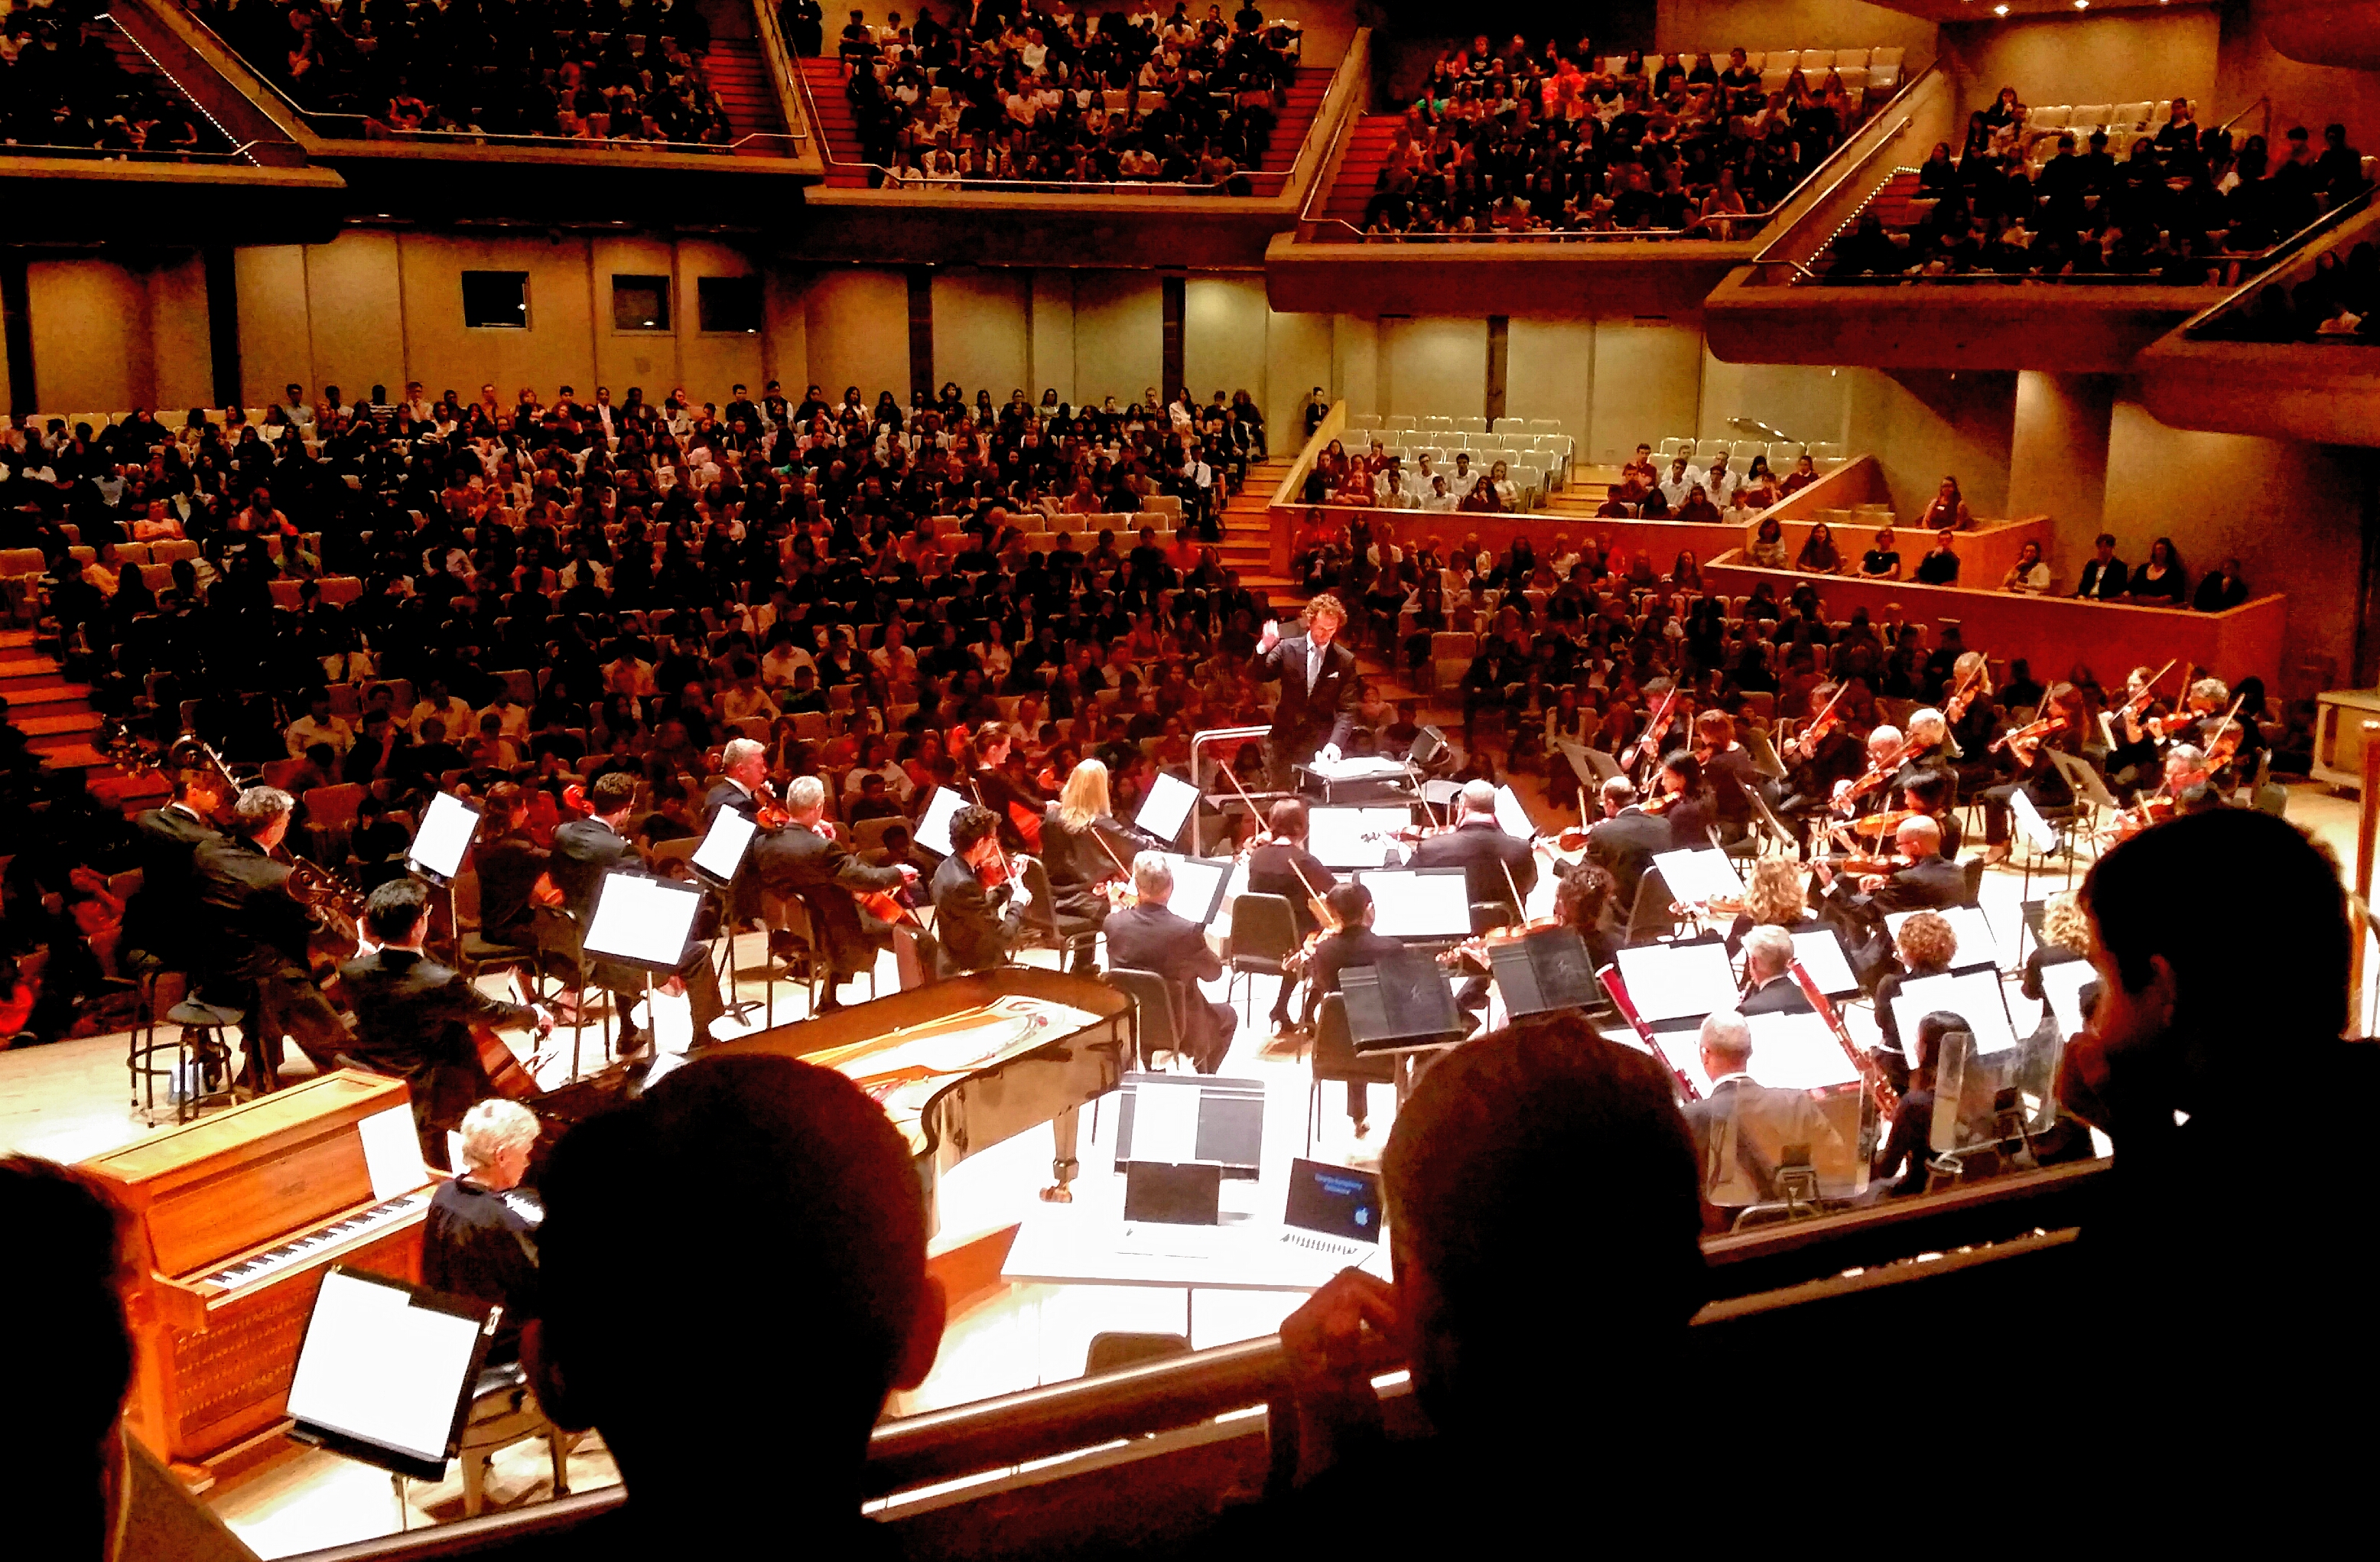 Courtice goes to the symphony